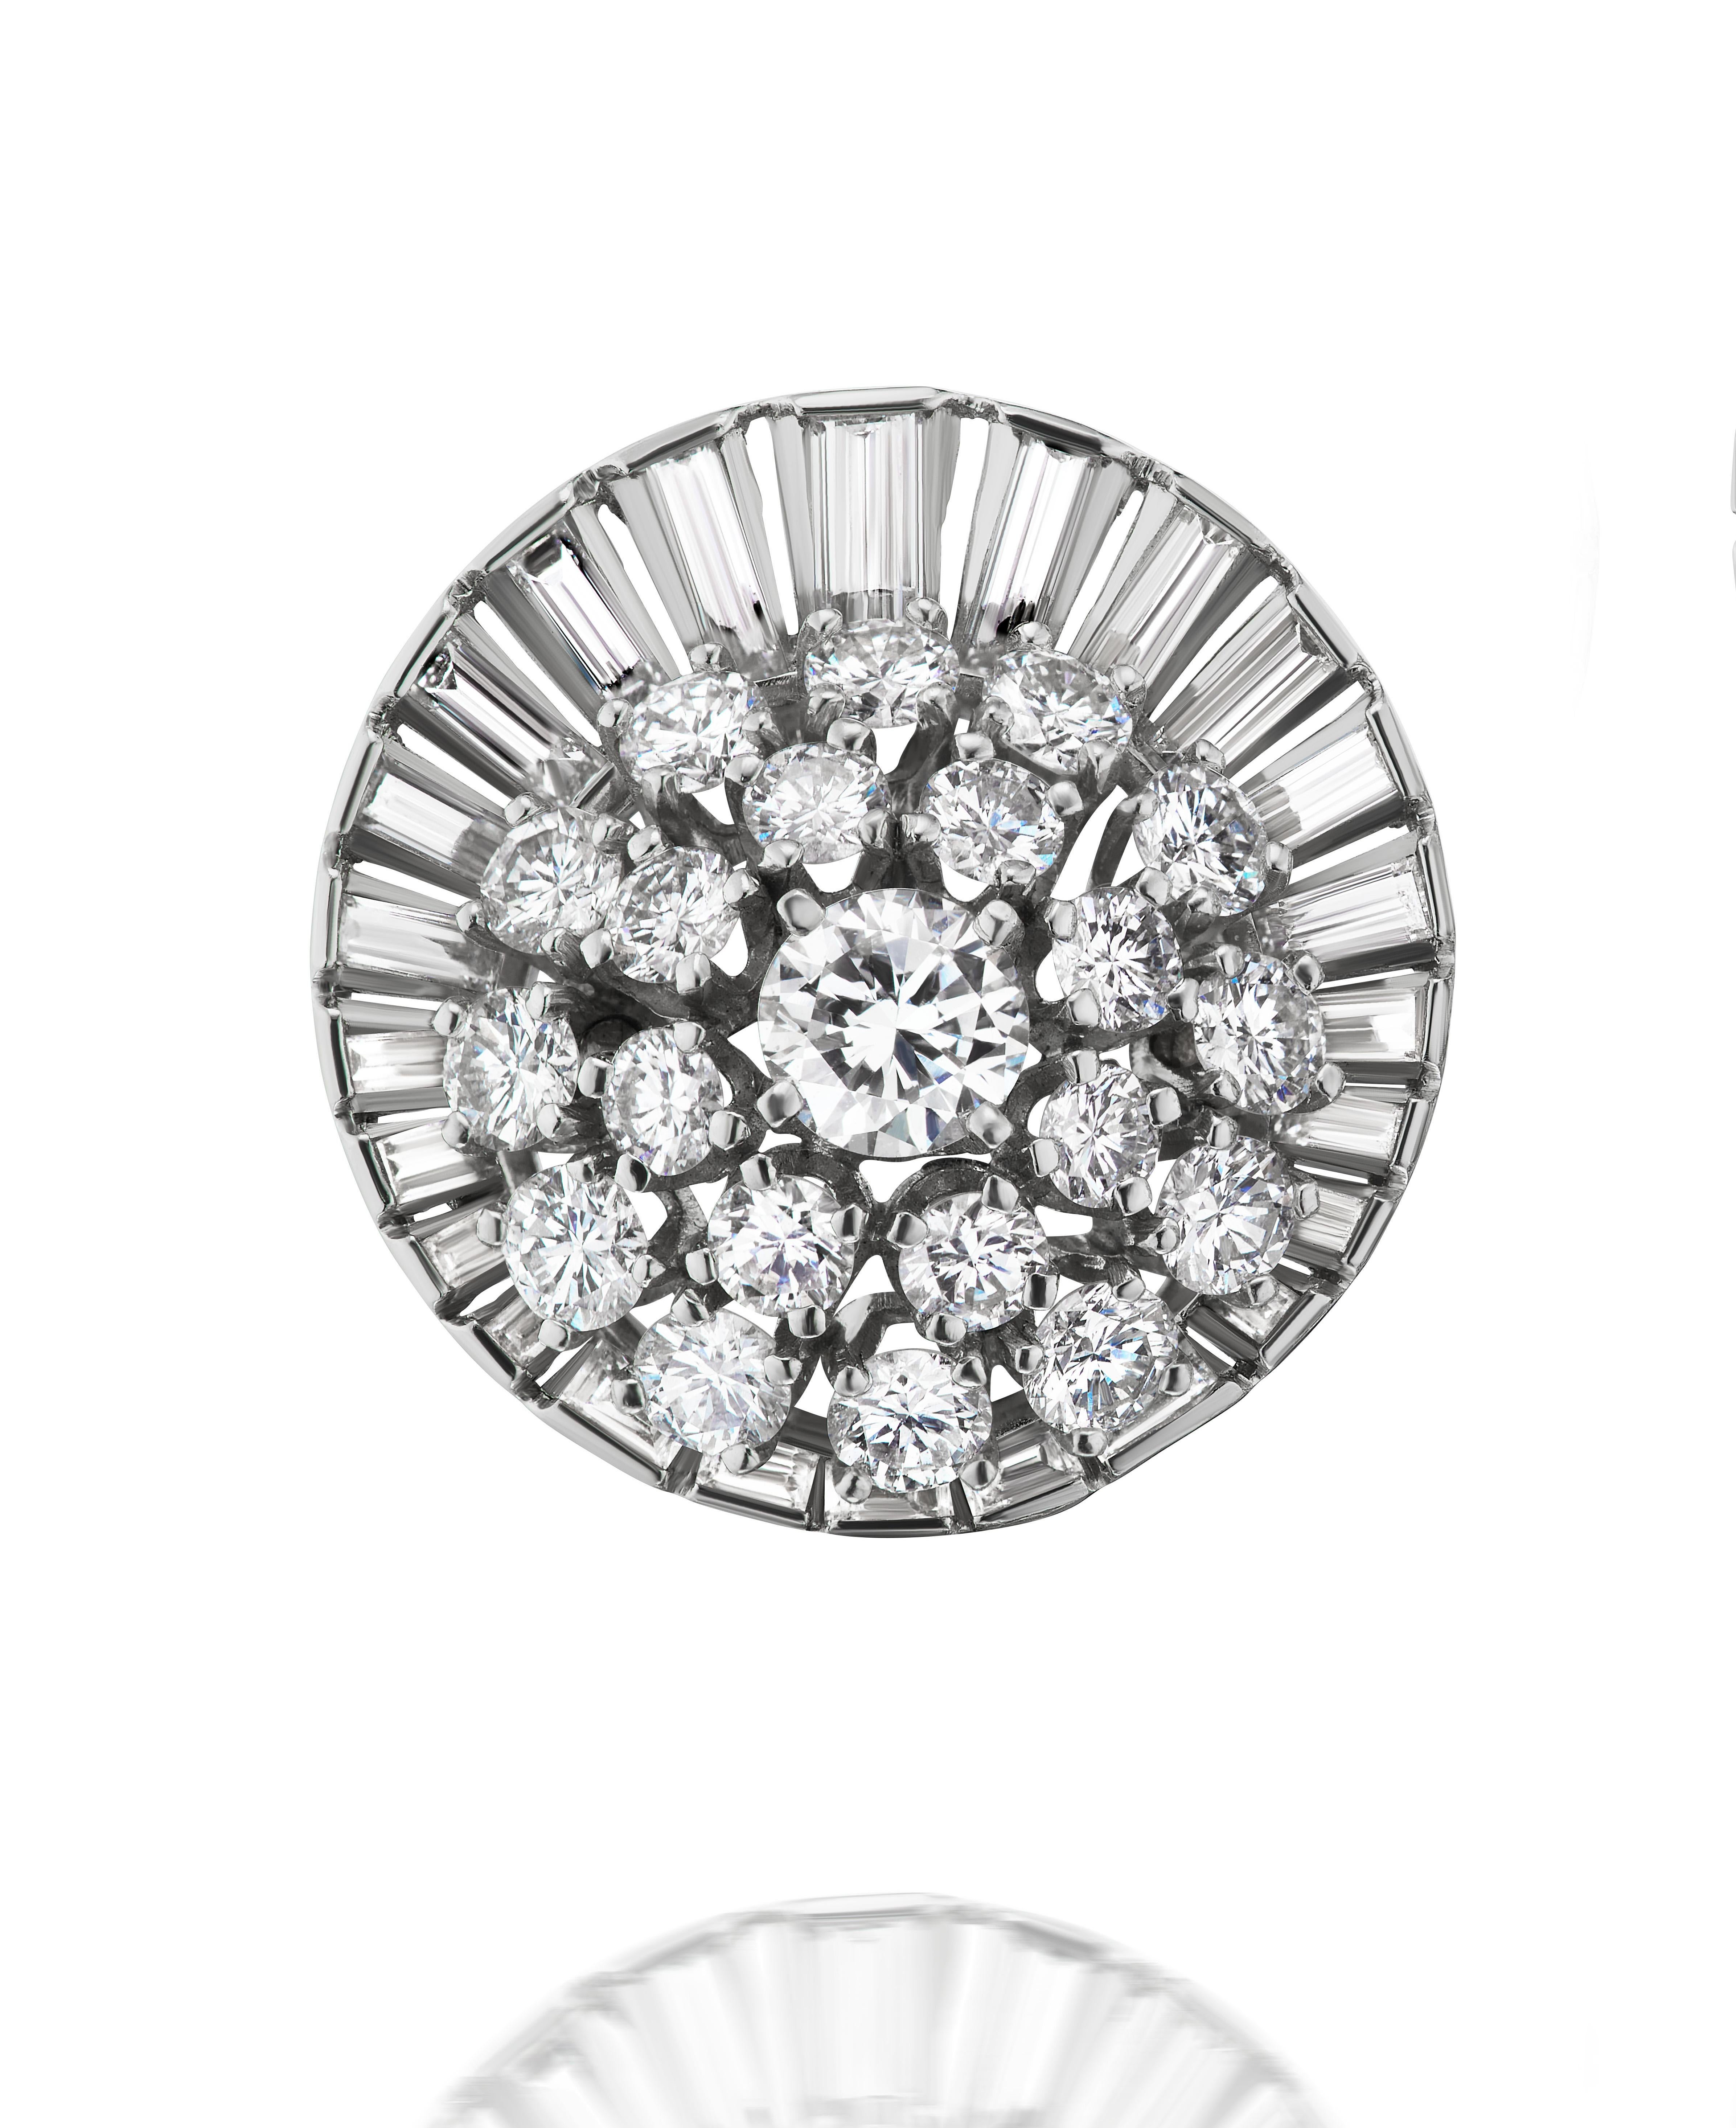 Retro-style round brilliant and baguette diamonds laid out in a distinctive satellite pattern.

This exquisite design consists of approximately 6.70 carats of round diamonds in a natural bombé pattern laid over a baguette halo of approximately 3.50